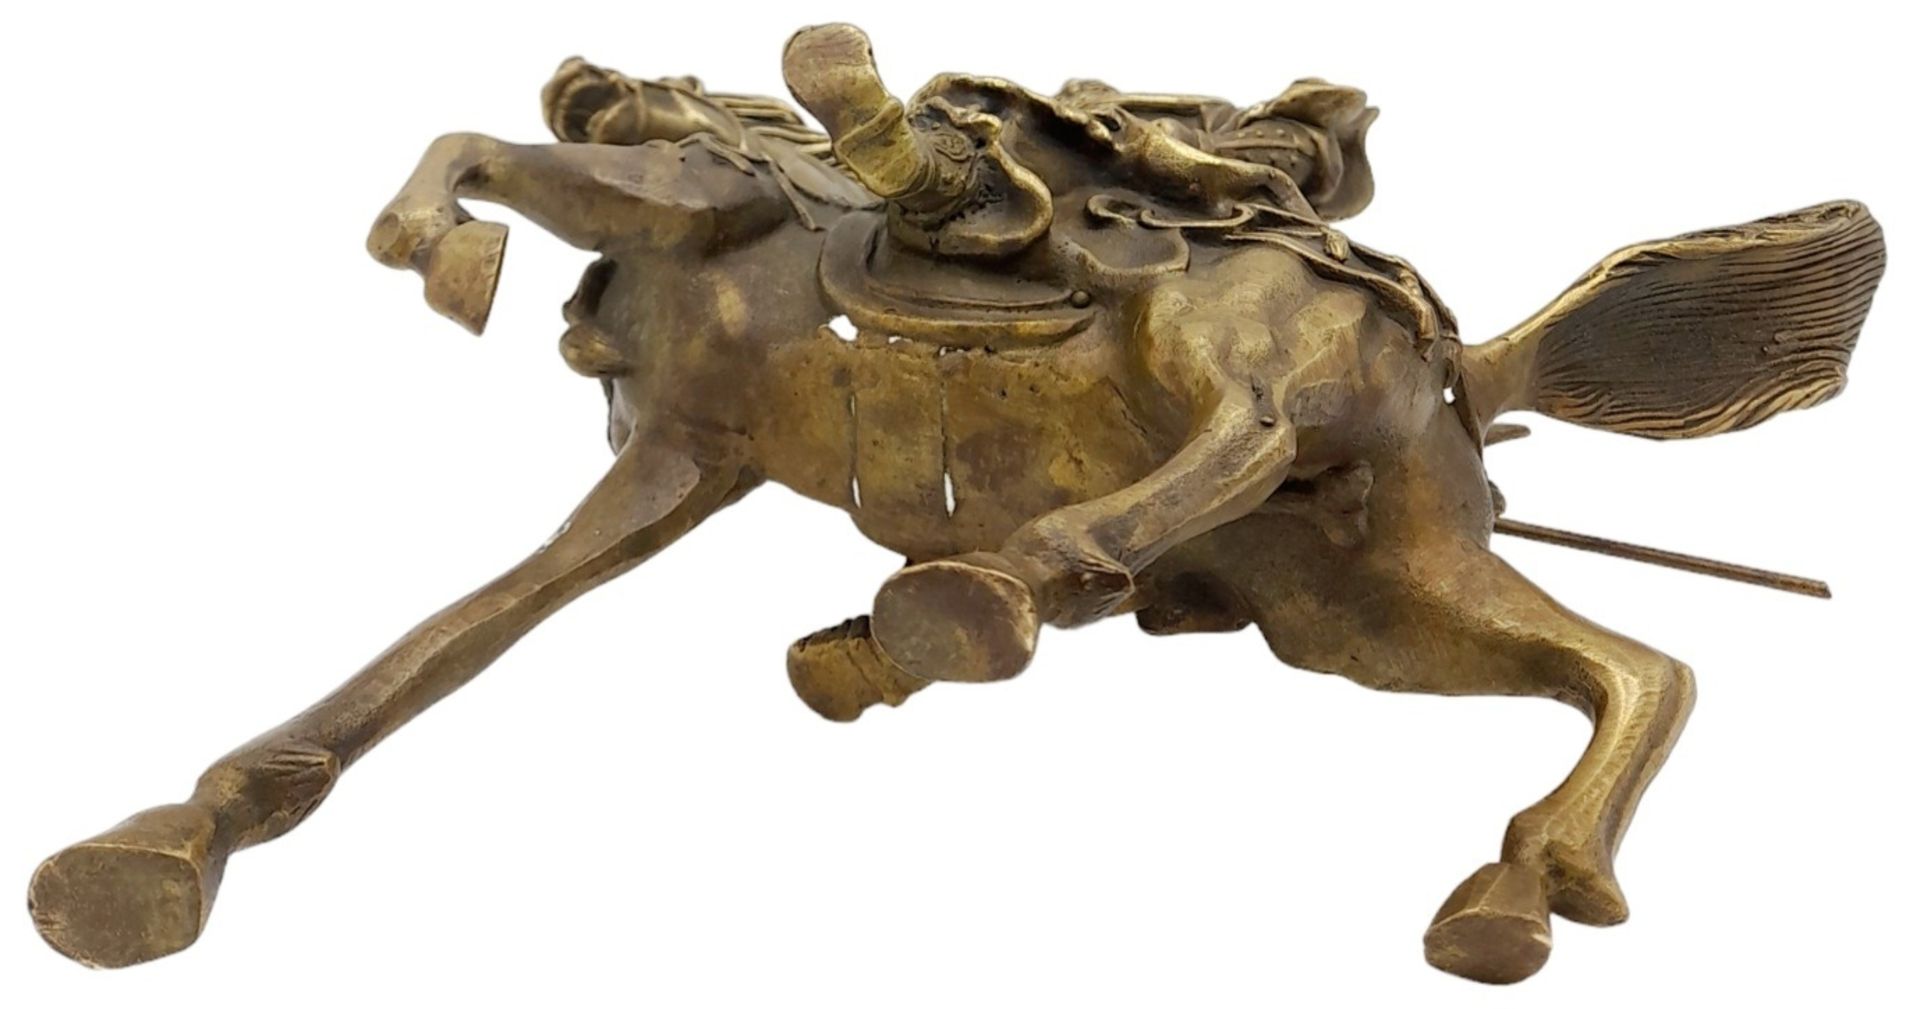 A Vintage Chinese Copper Guan Gong (God of war and wealth) on Horseback Statue. 23cm x 19cm tall. - Image 6 of 6